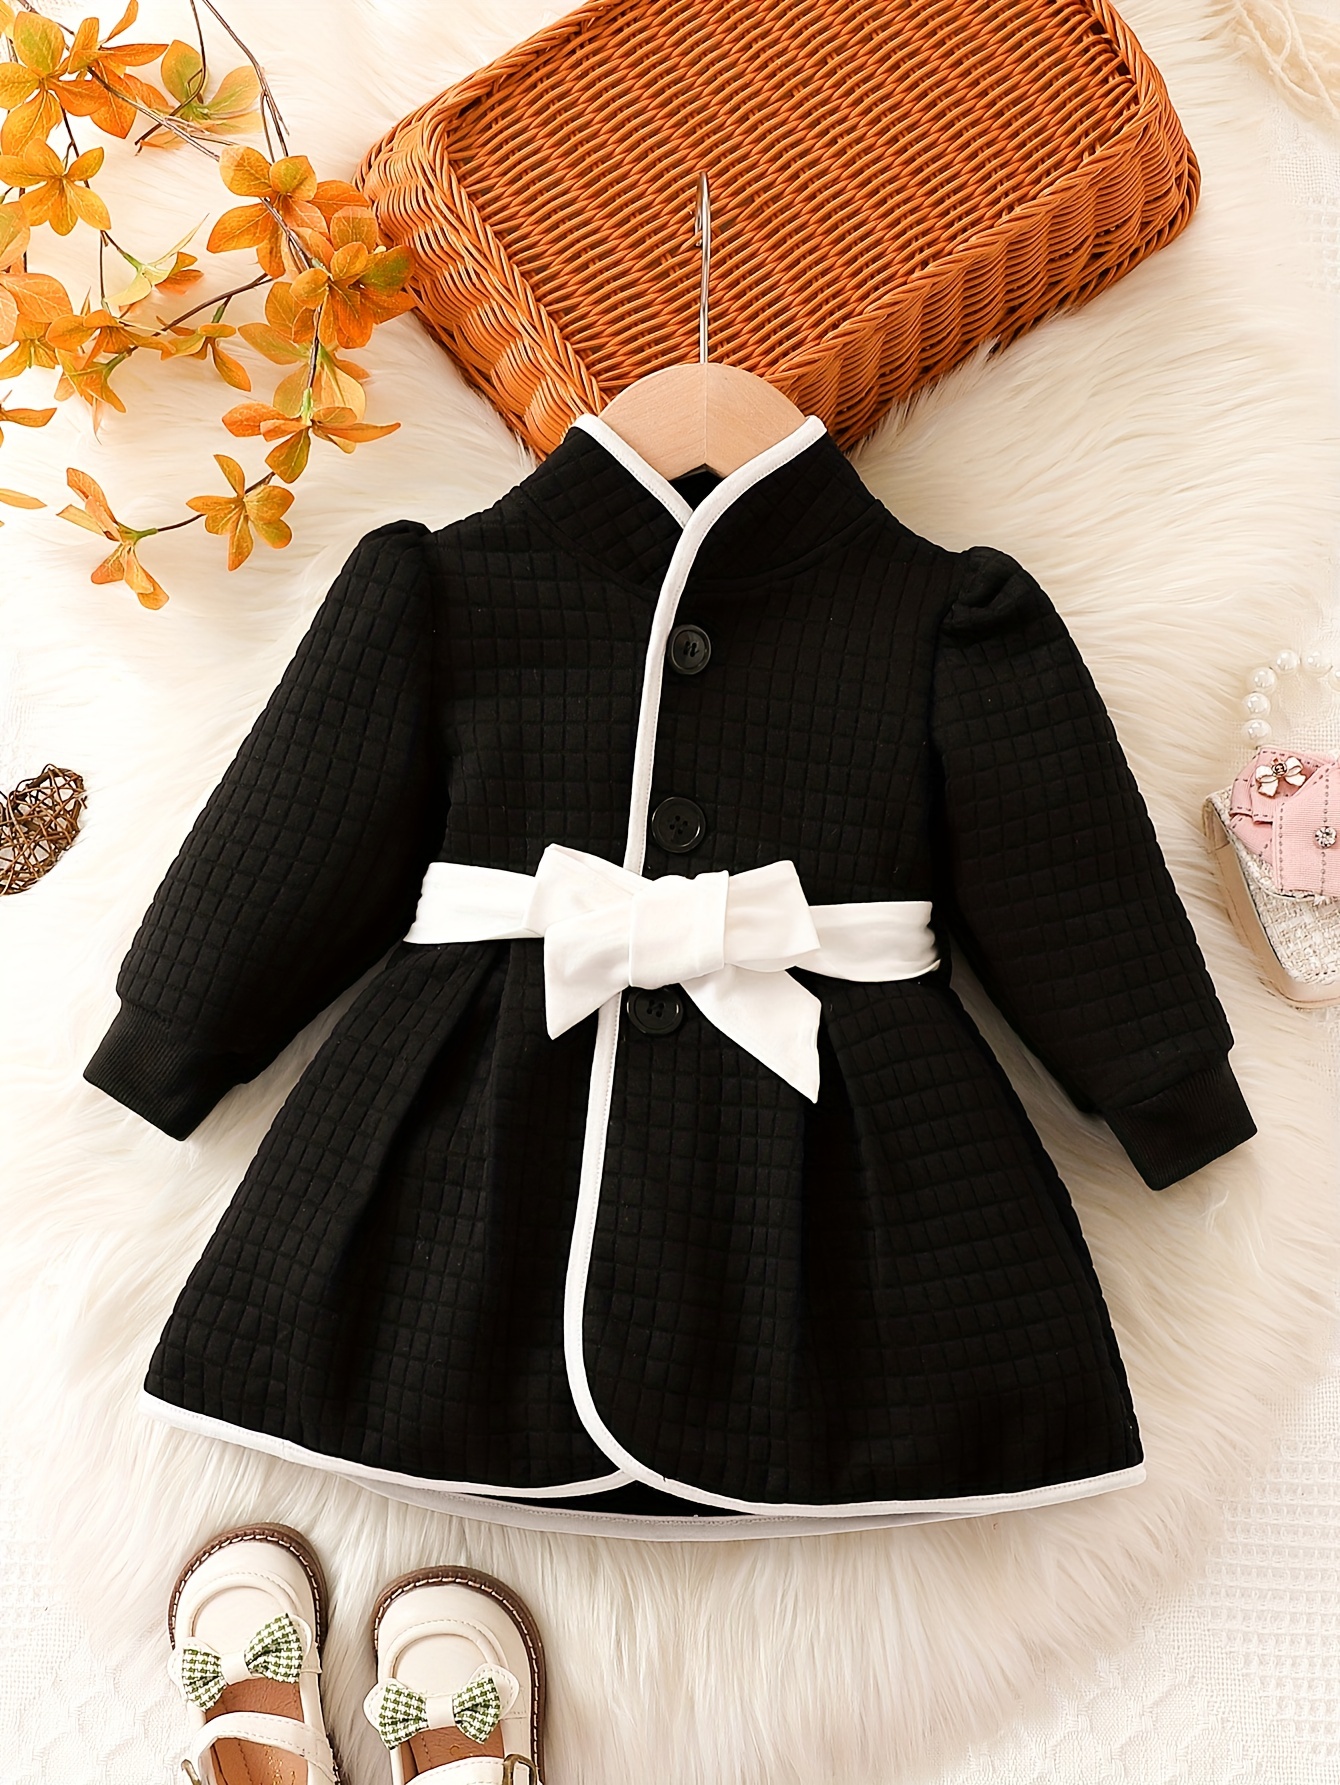 Baby Girls Fashion Autumn And Winter Thermal Belted Dress Set Princess Coat  Classic Black And White Color Contrast Cardigan